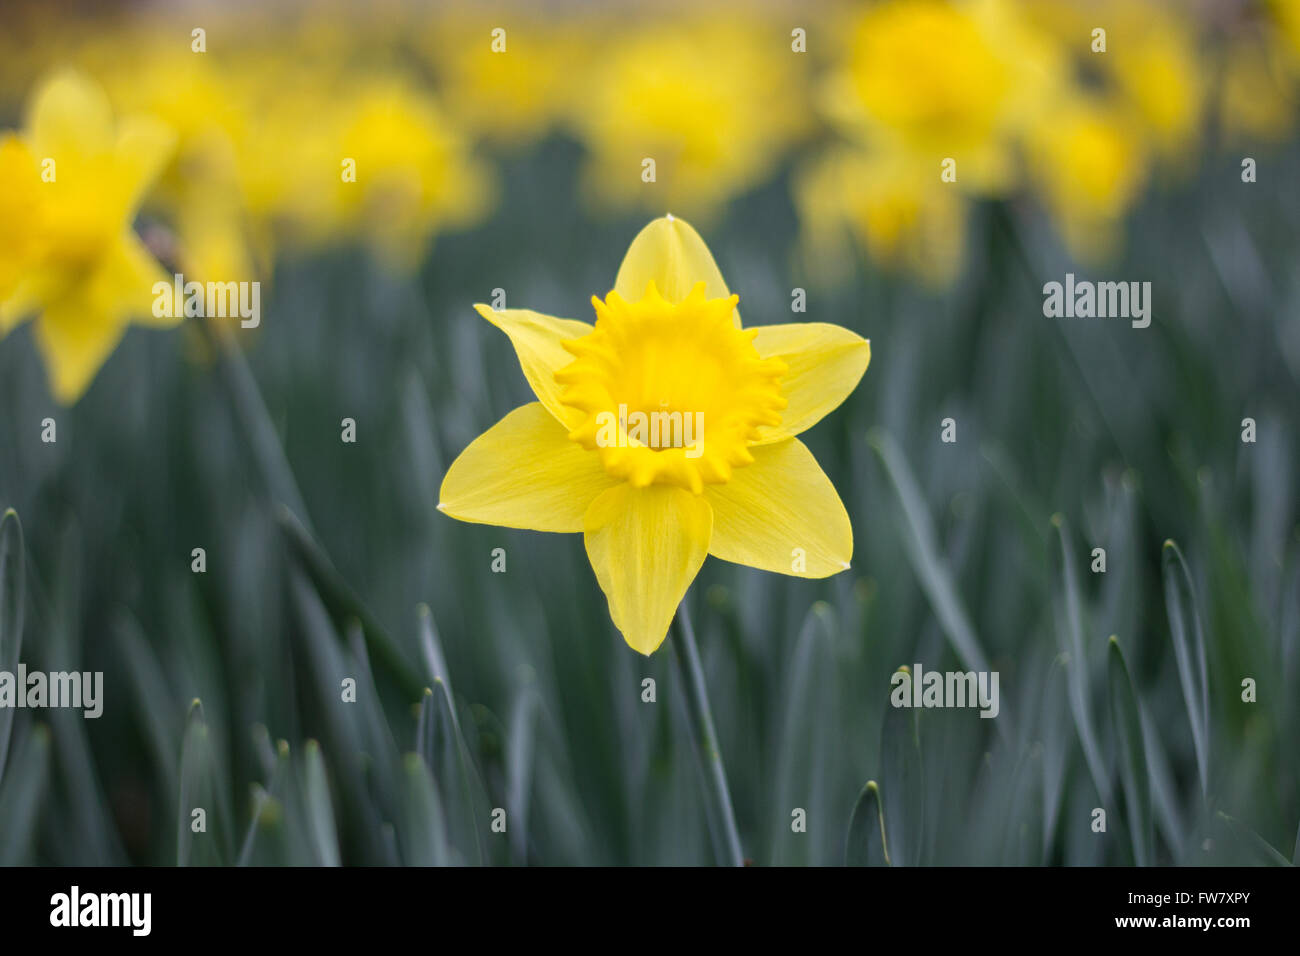 blooming yellow narcissus, jonquil flower standing out of daffodil flowerbed Stock Photo